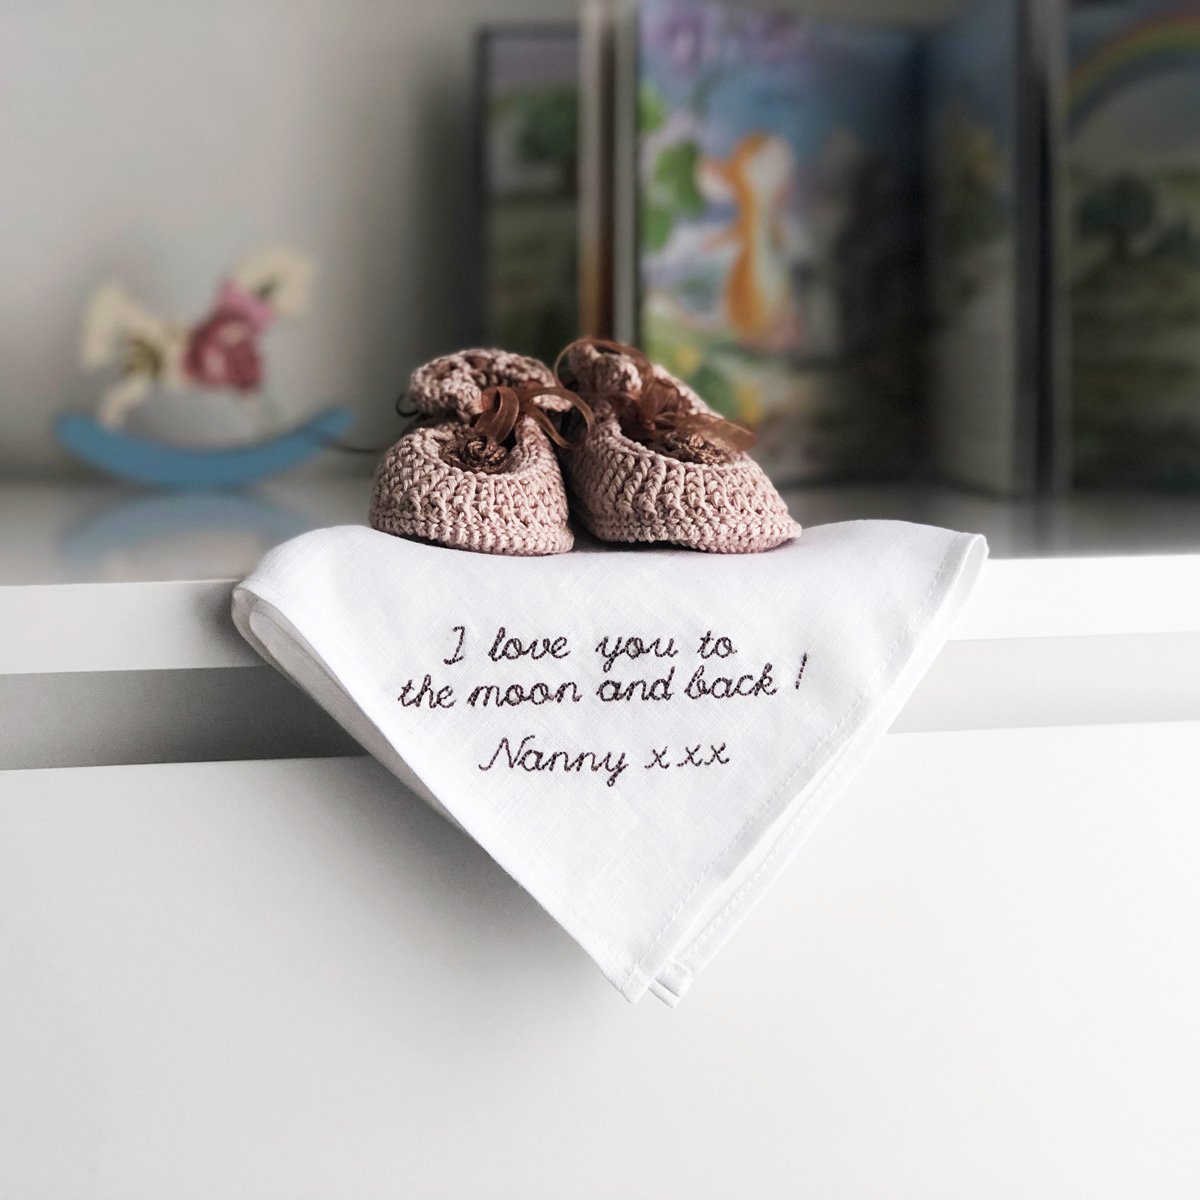 lifestyle| Pure White Linen Hanky embroidered with a message that reads  I love you to the moon and back, Nanny, kisses - by Linen & Fonts